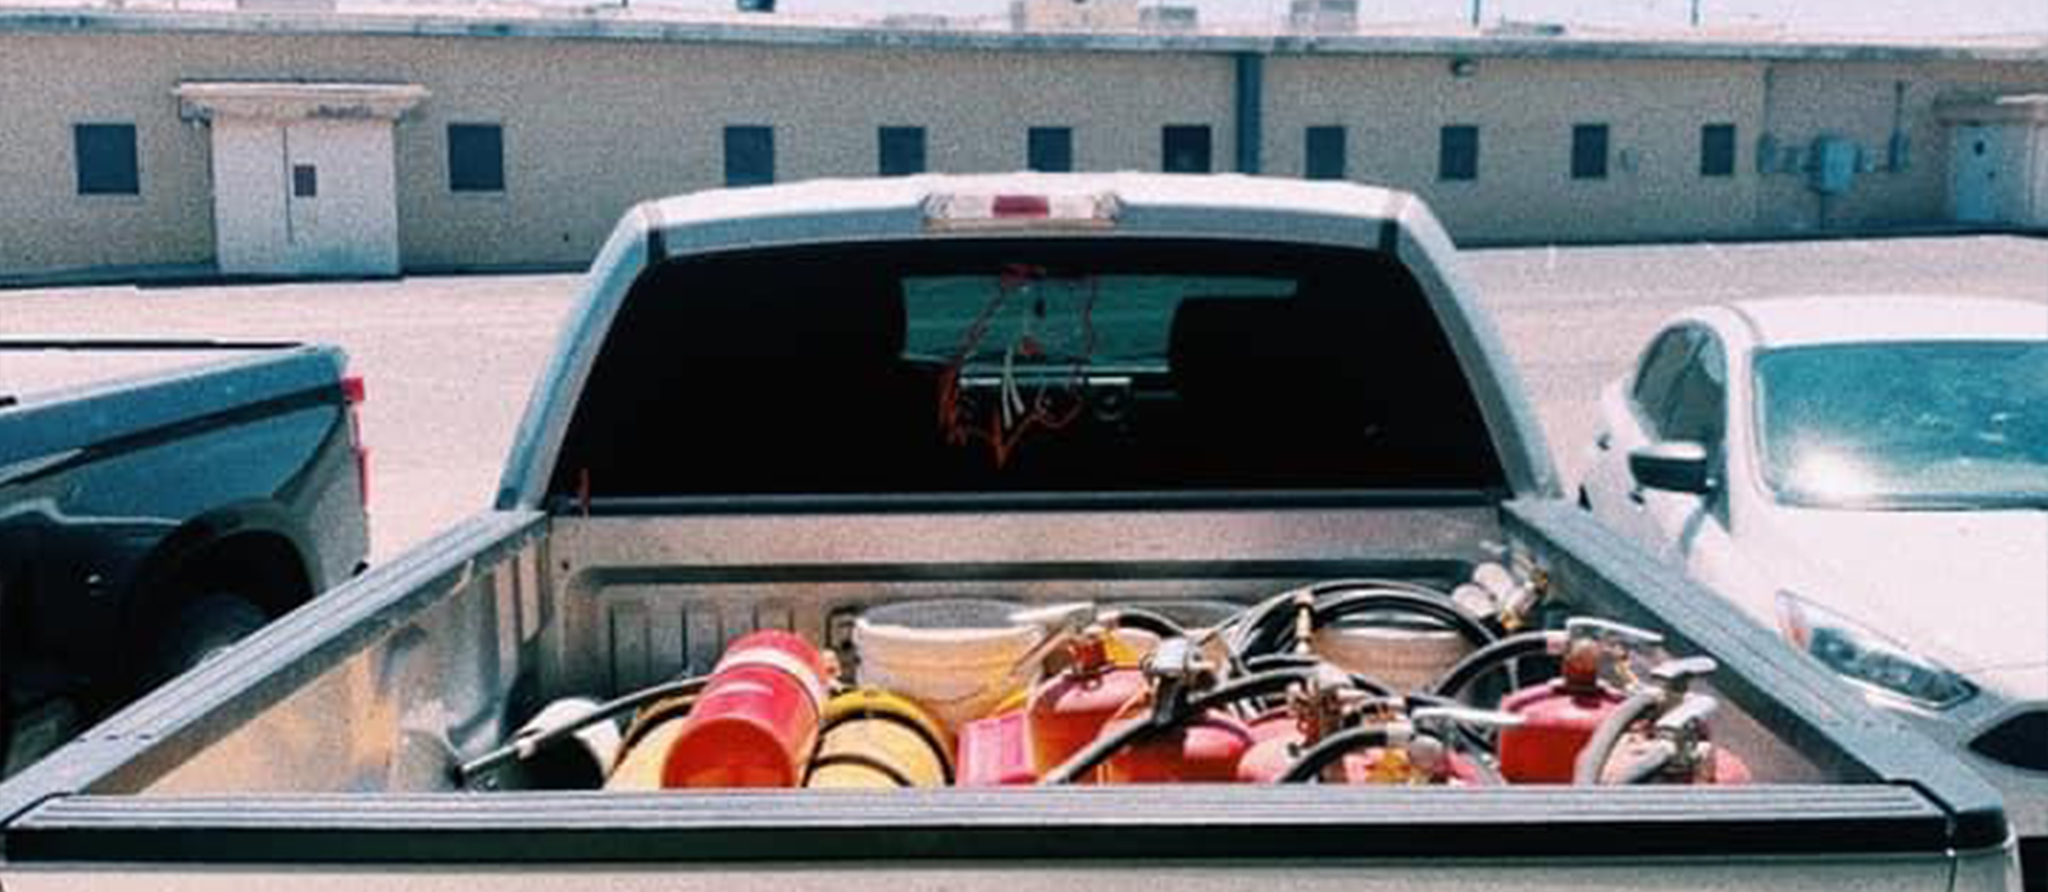 Fire Extinguishers in Truck